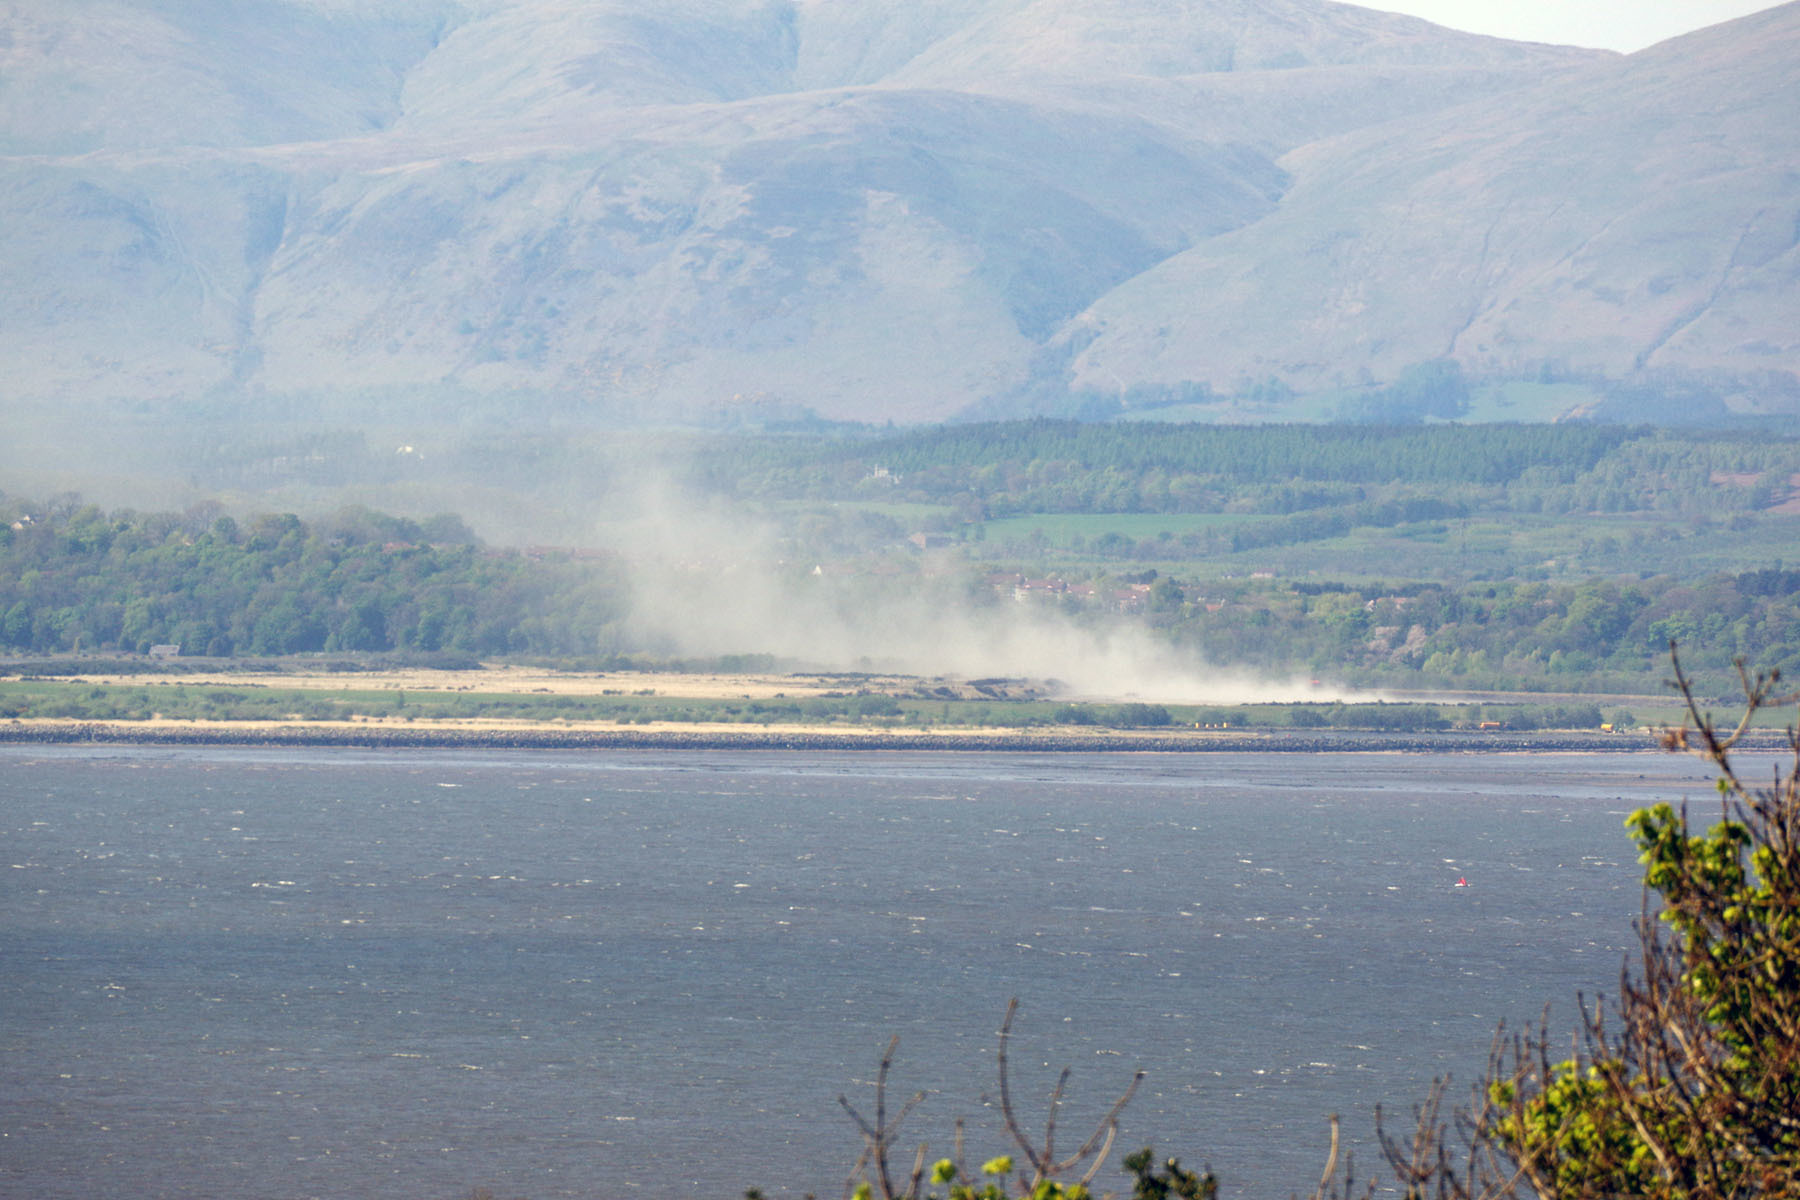 Dust seen from across the Forth